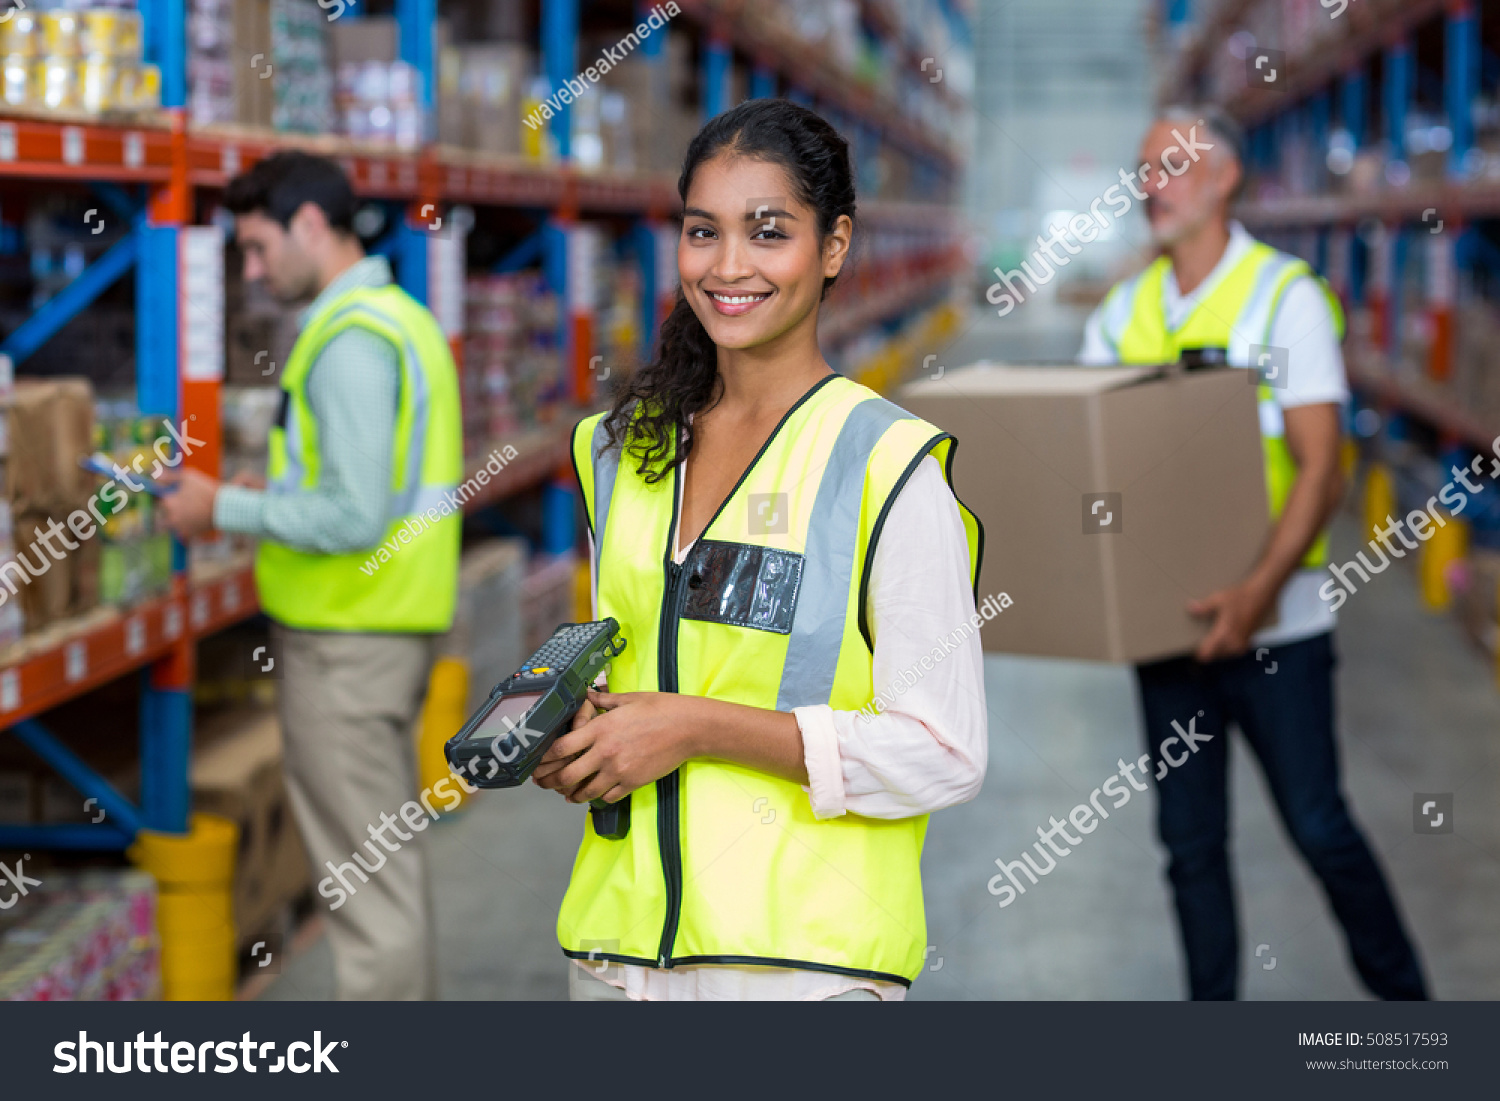 stock-photo-portrait-of-female-warehouse-worker-standing-with-barcode-scanner-in-warehouse-508517593